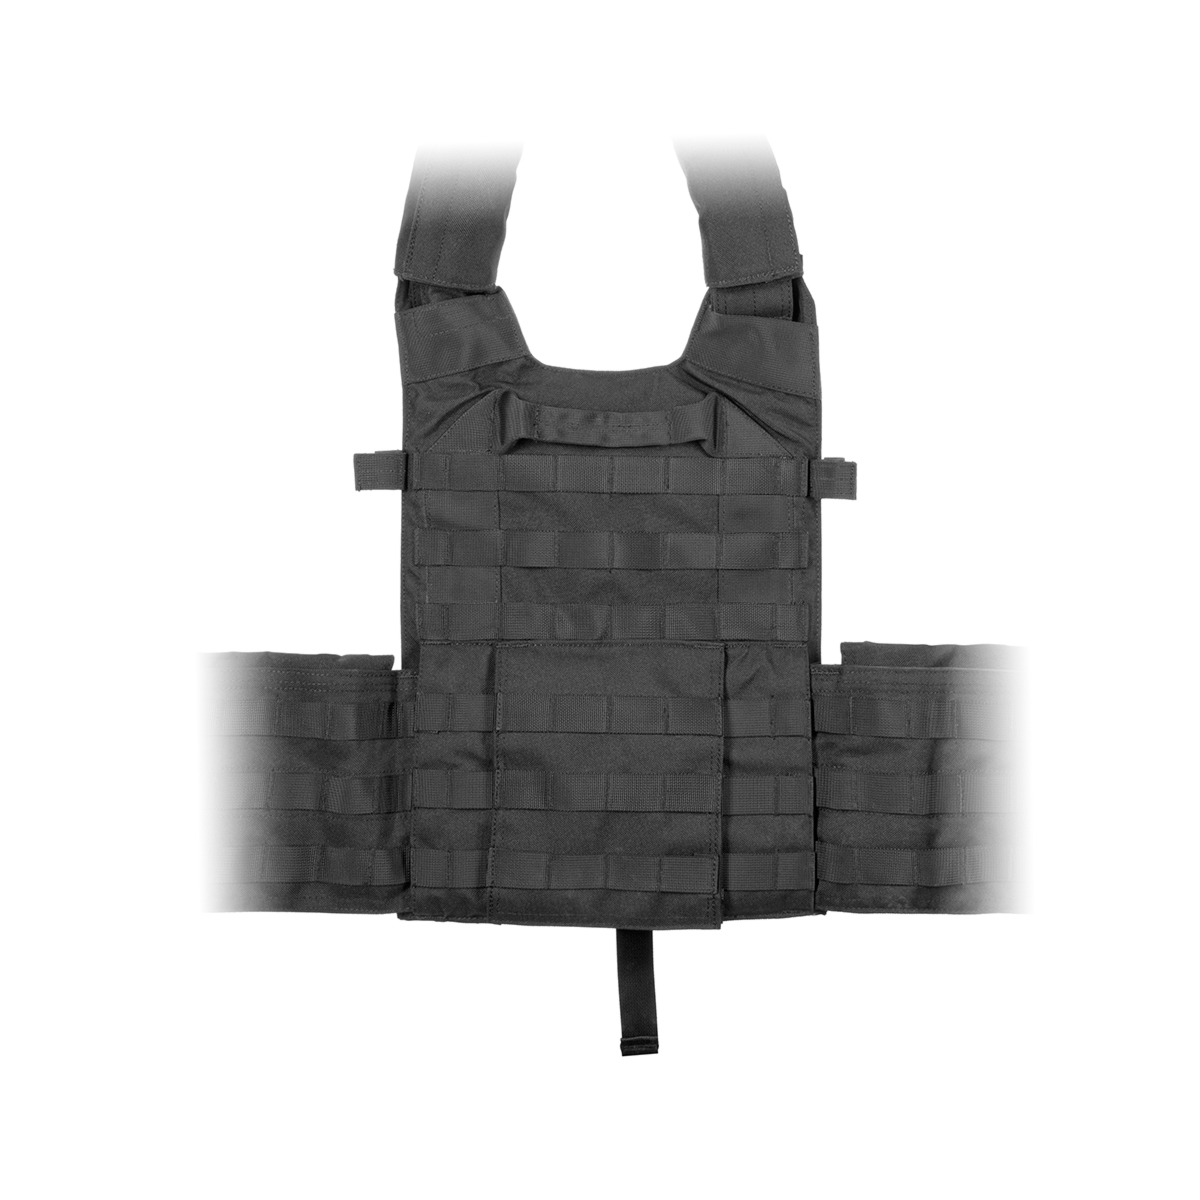 Invader Gear 6094A-RS Plate Carrier Black